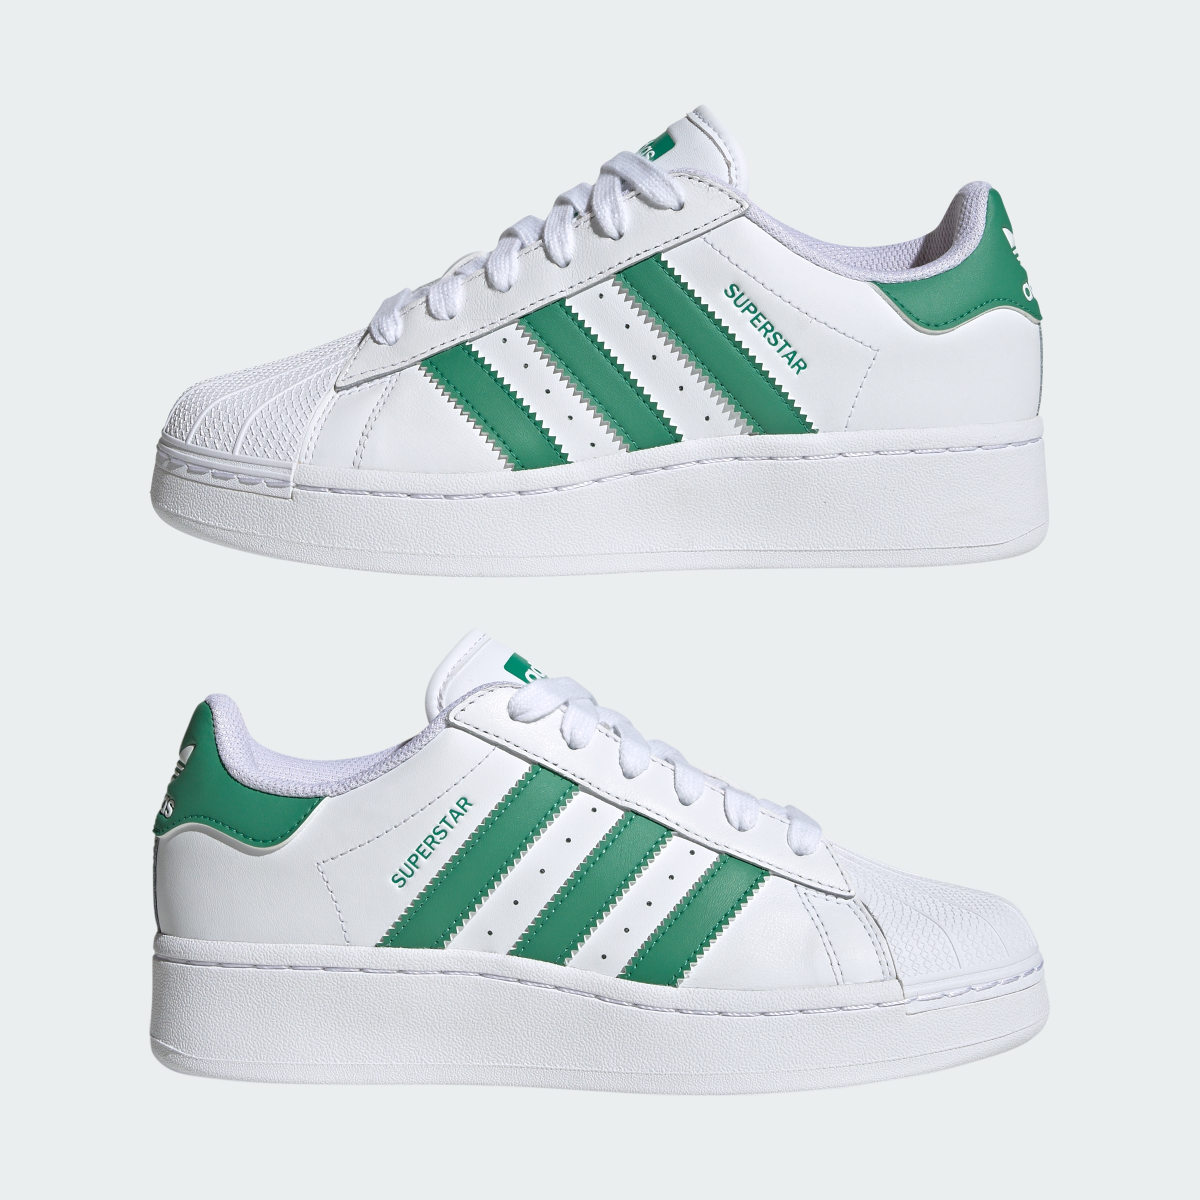 Adidas Superstar XLG Shoes. 8